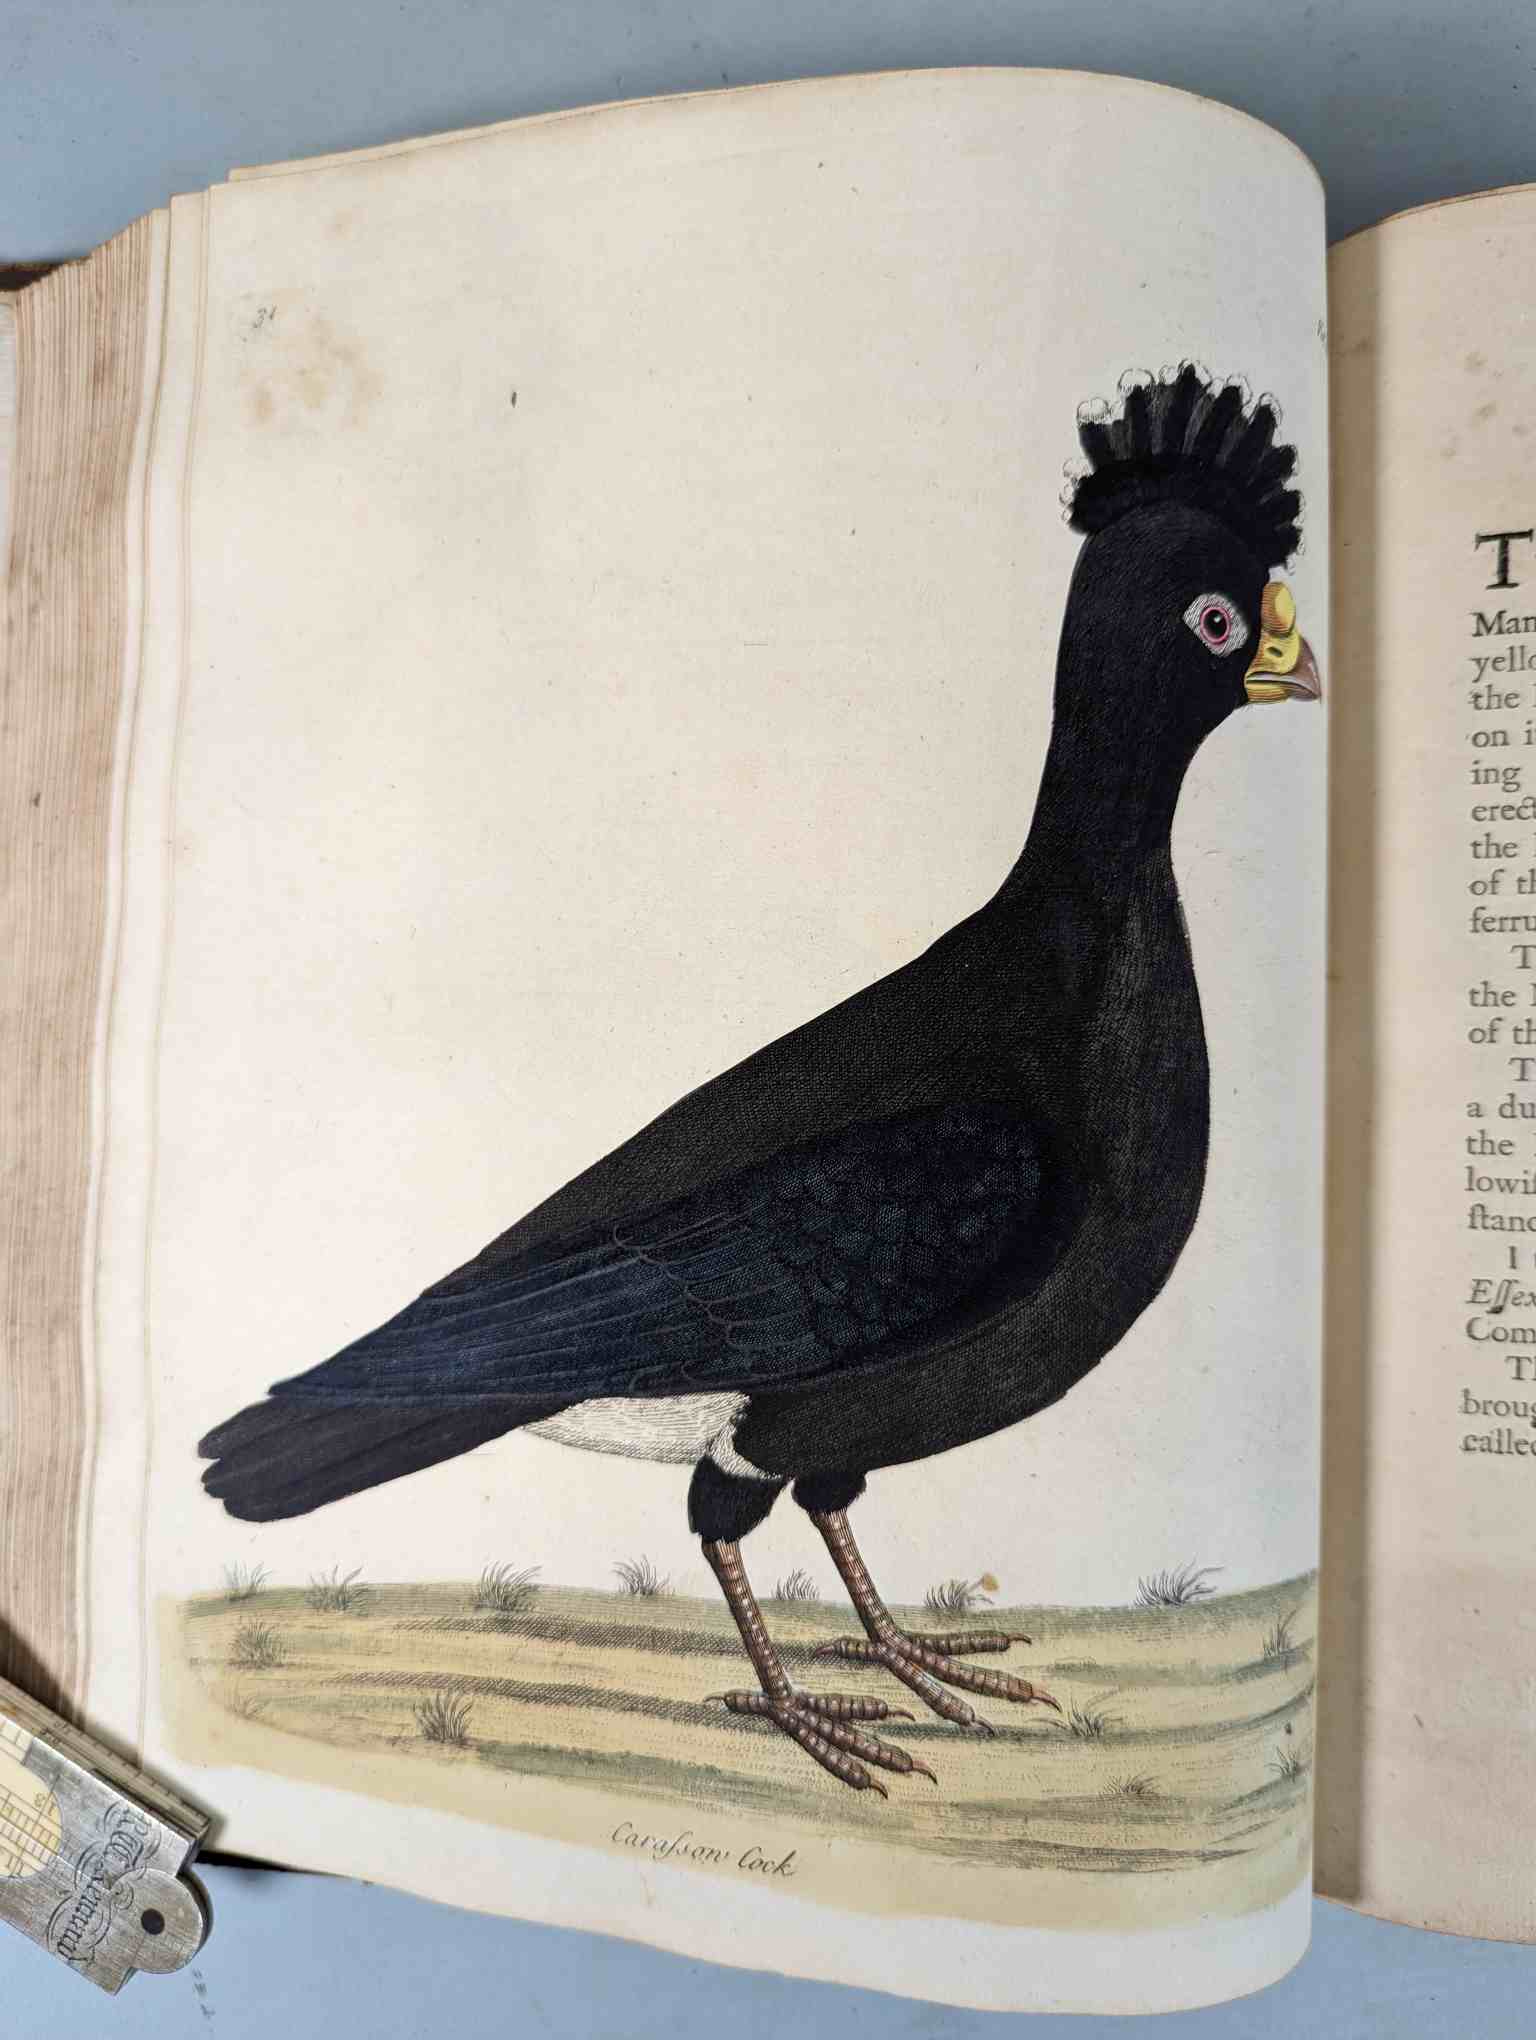 ALBIN, Eleazar. A Natural History of Birds, to which are added, Notes and Observations by W. - Image 136 of 208